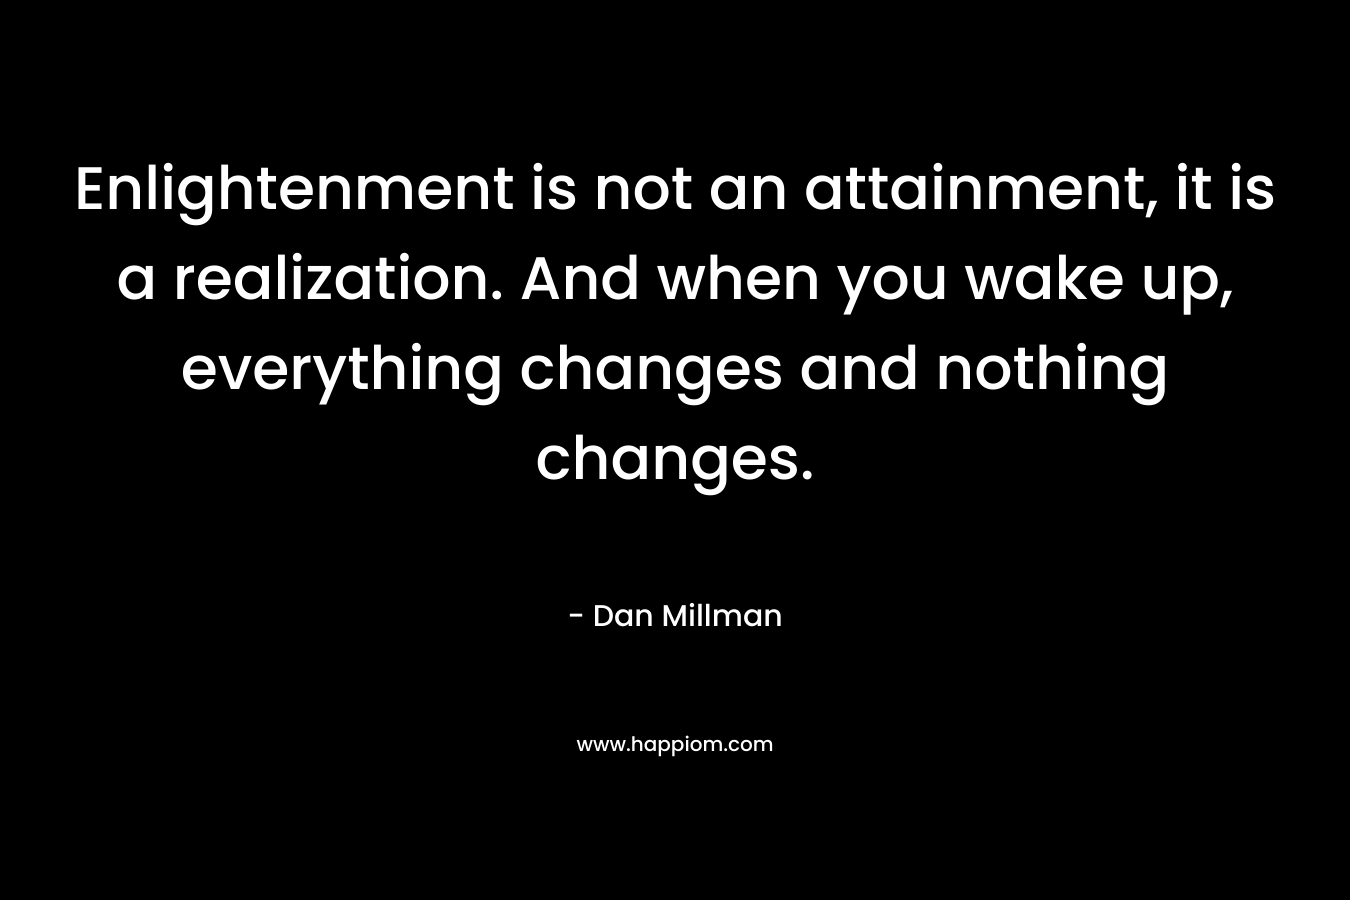 Enlightenment is not an attainment, it is a realization. And when you wake up, everything changes and nothing changes. – Dan Millman